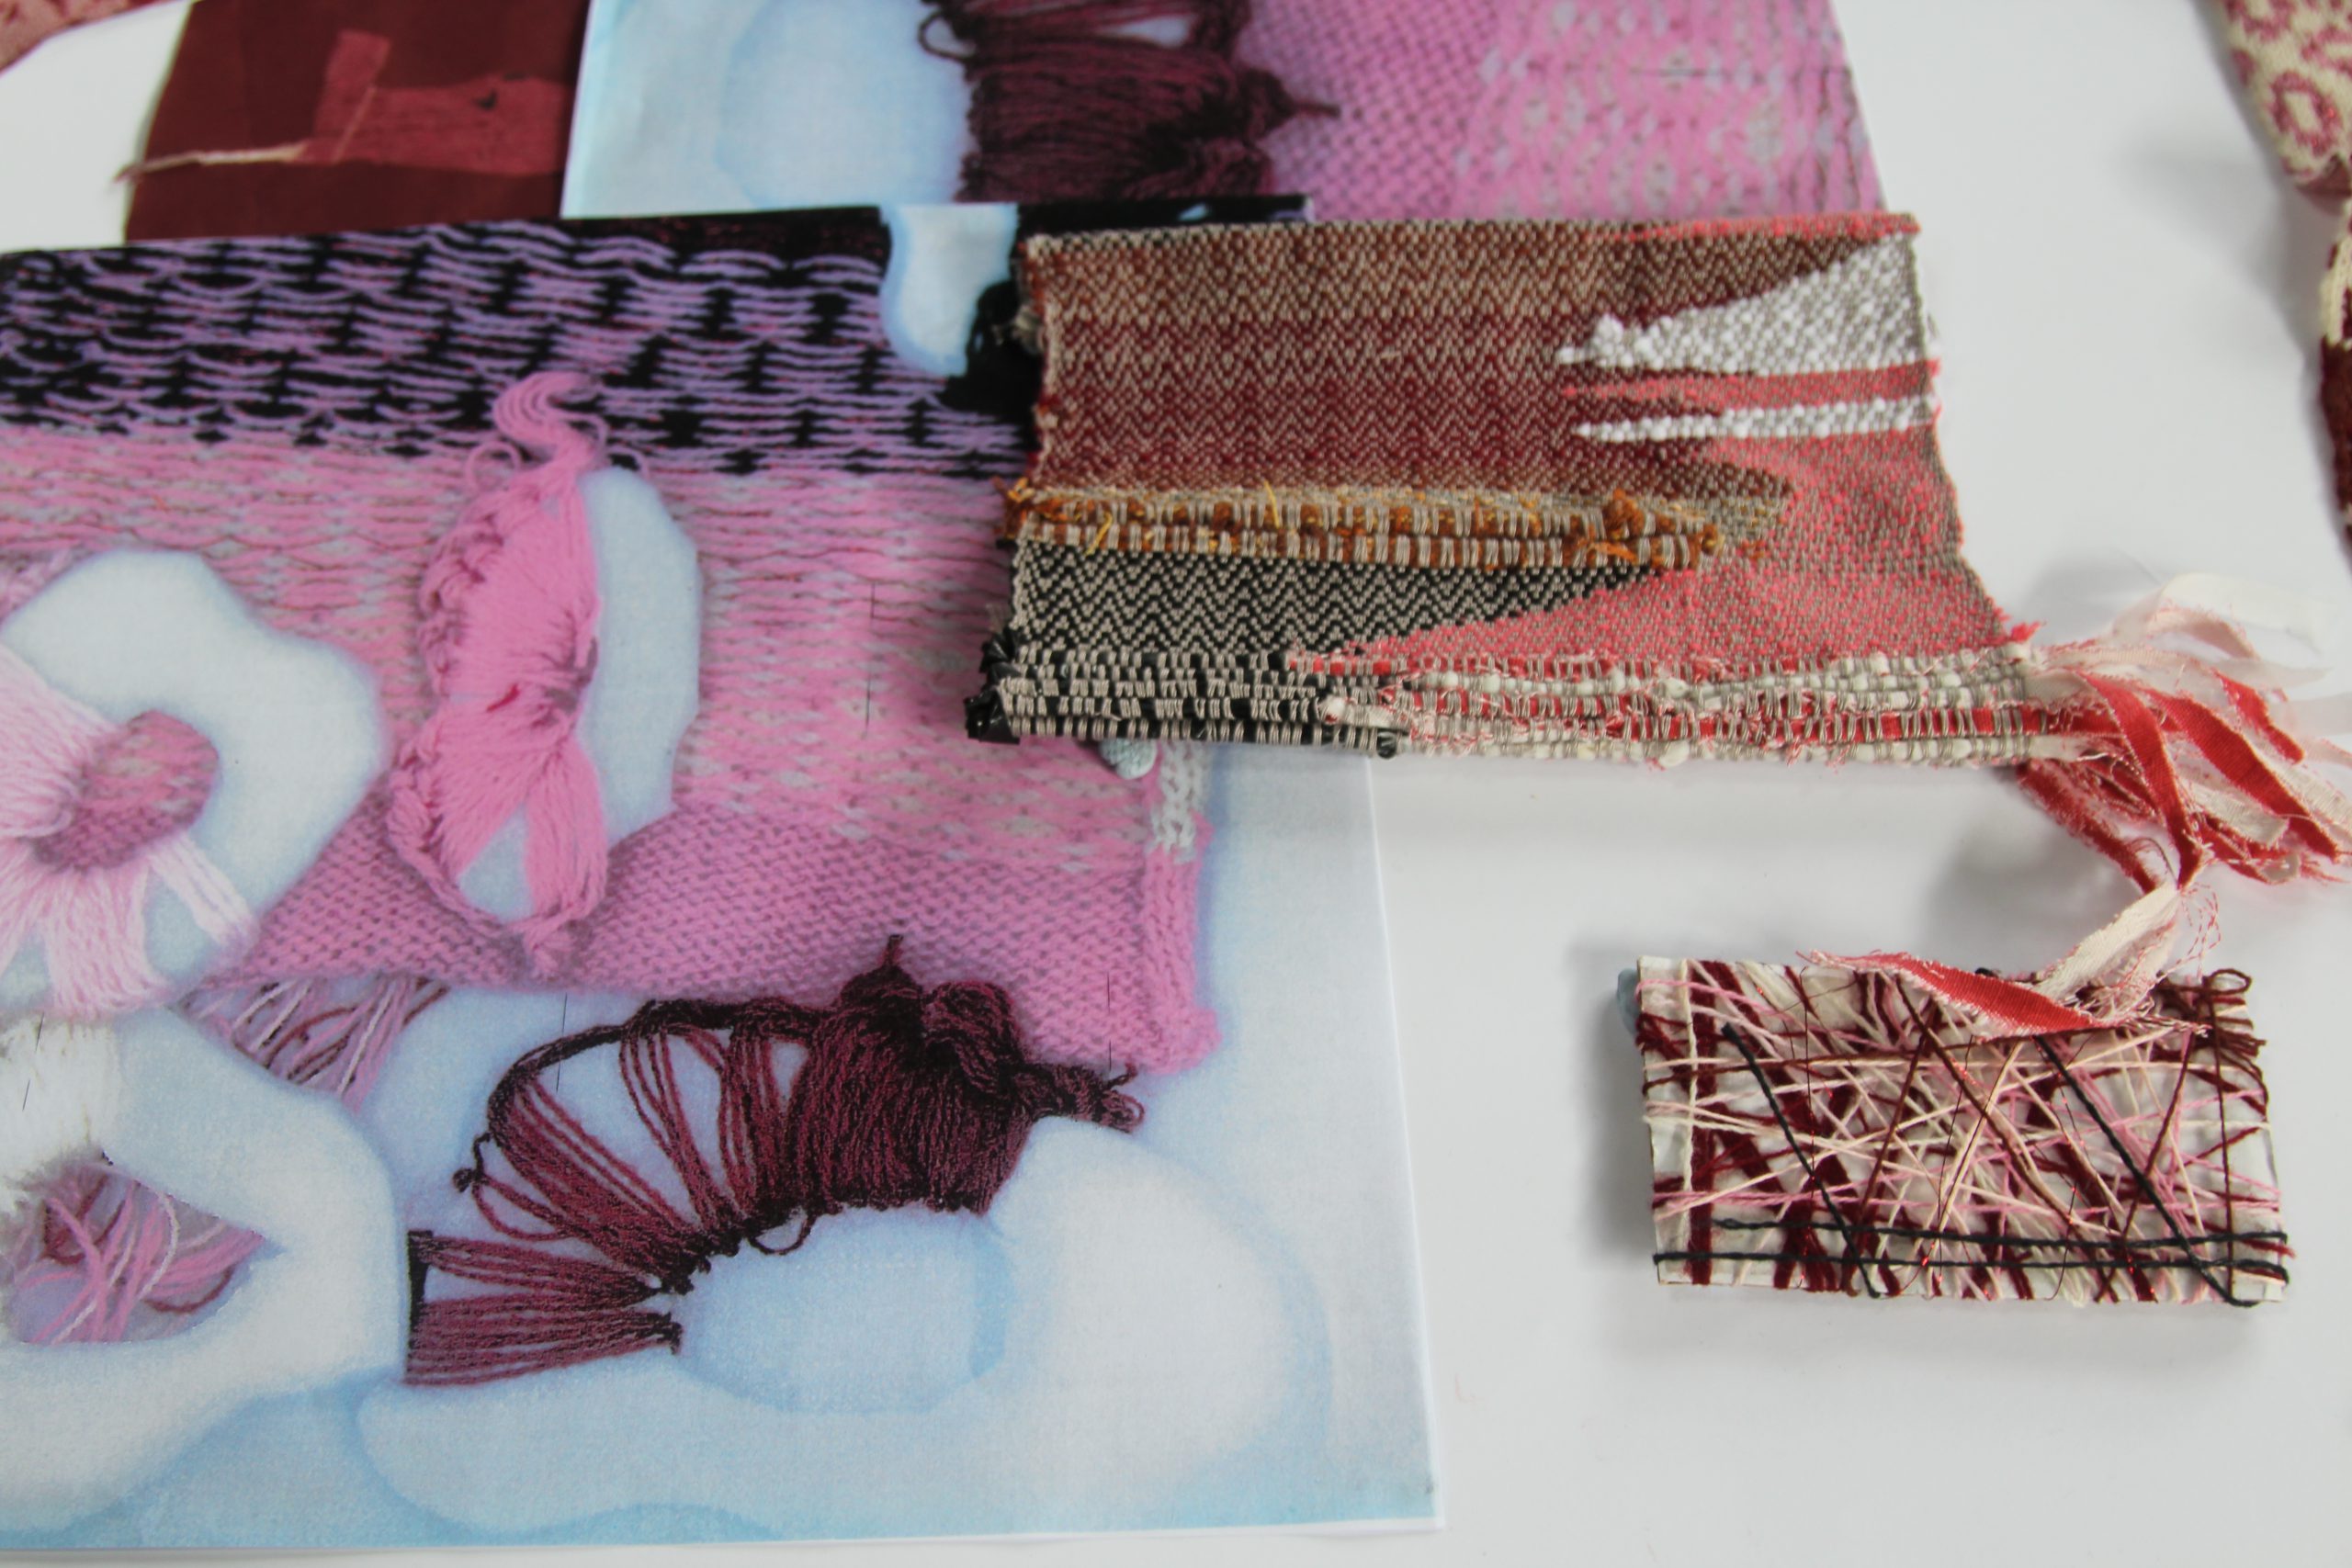 Birds eye view of textile samples in pink and maroon tones